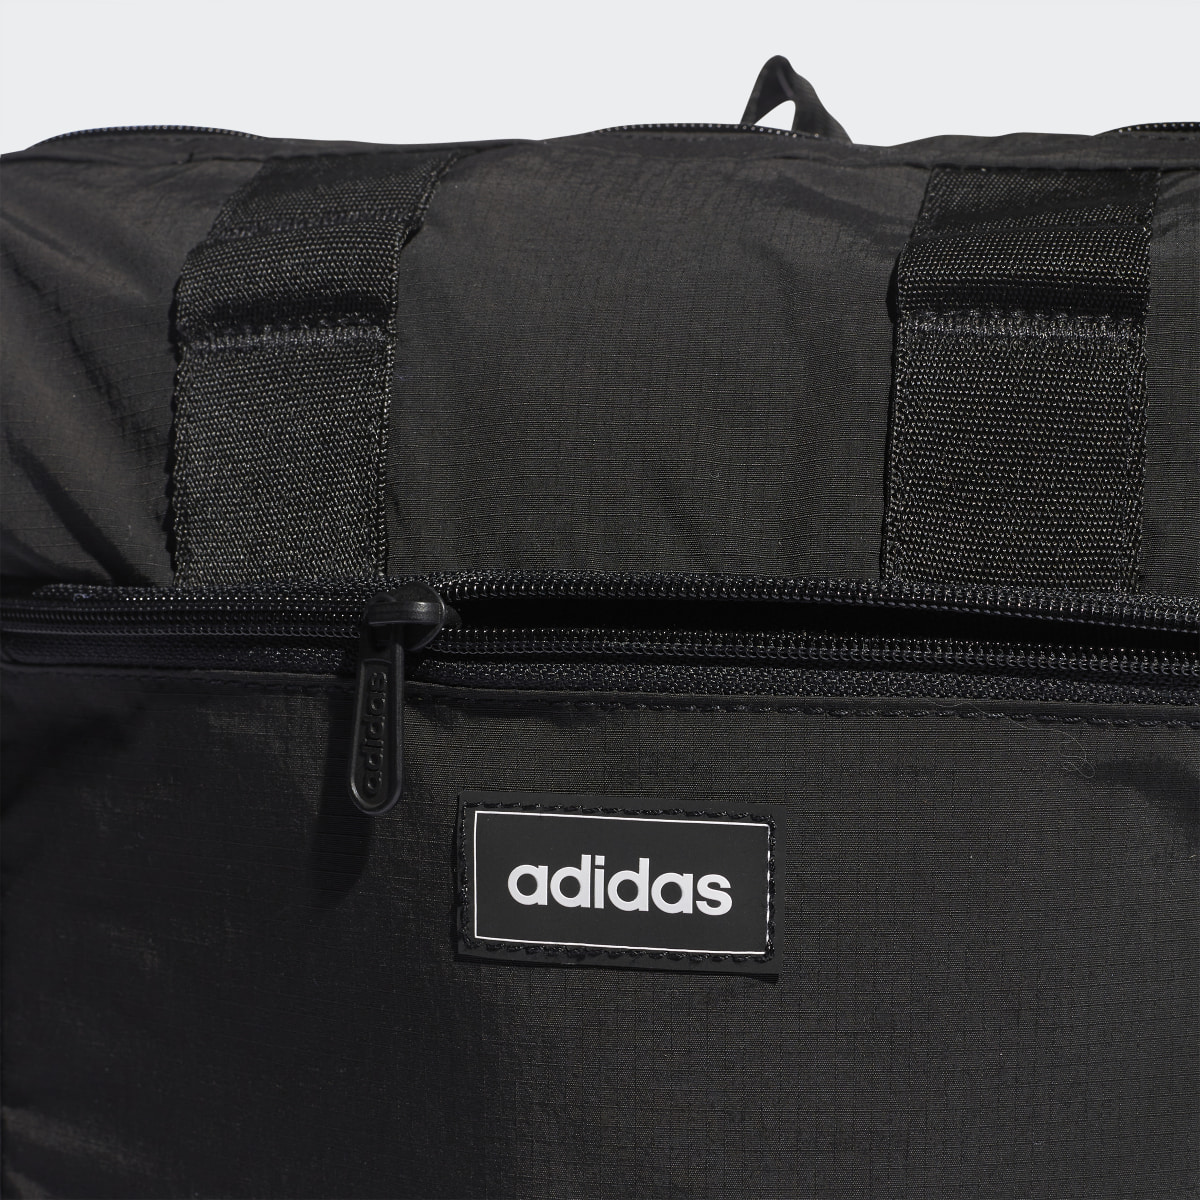 Adidas Tailored For Her Backpack Medium. 6